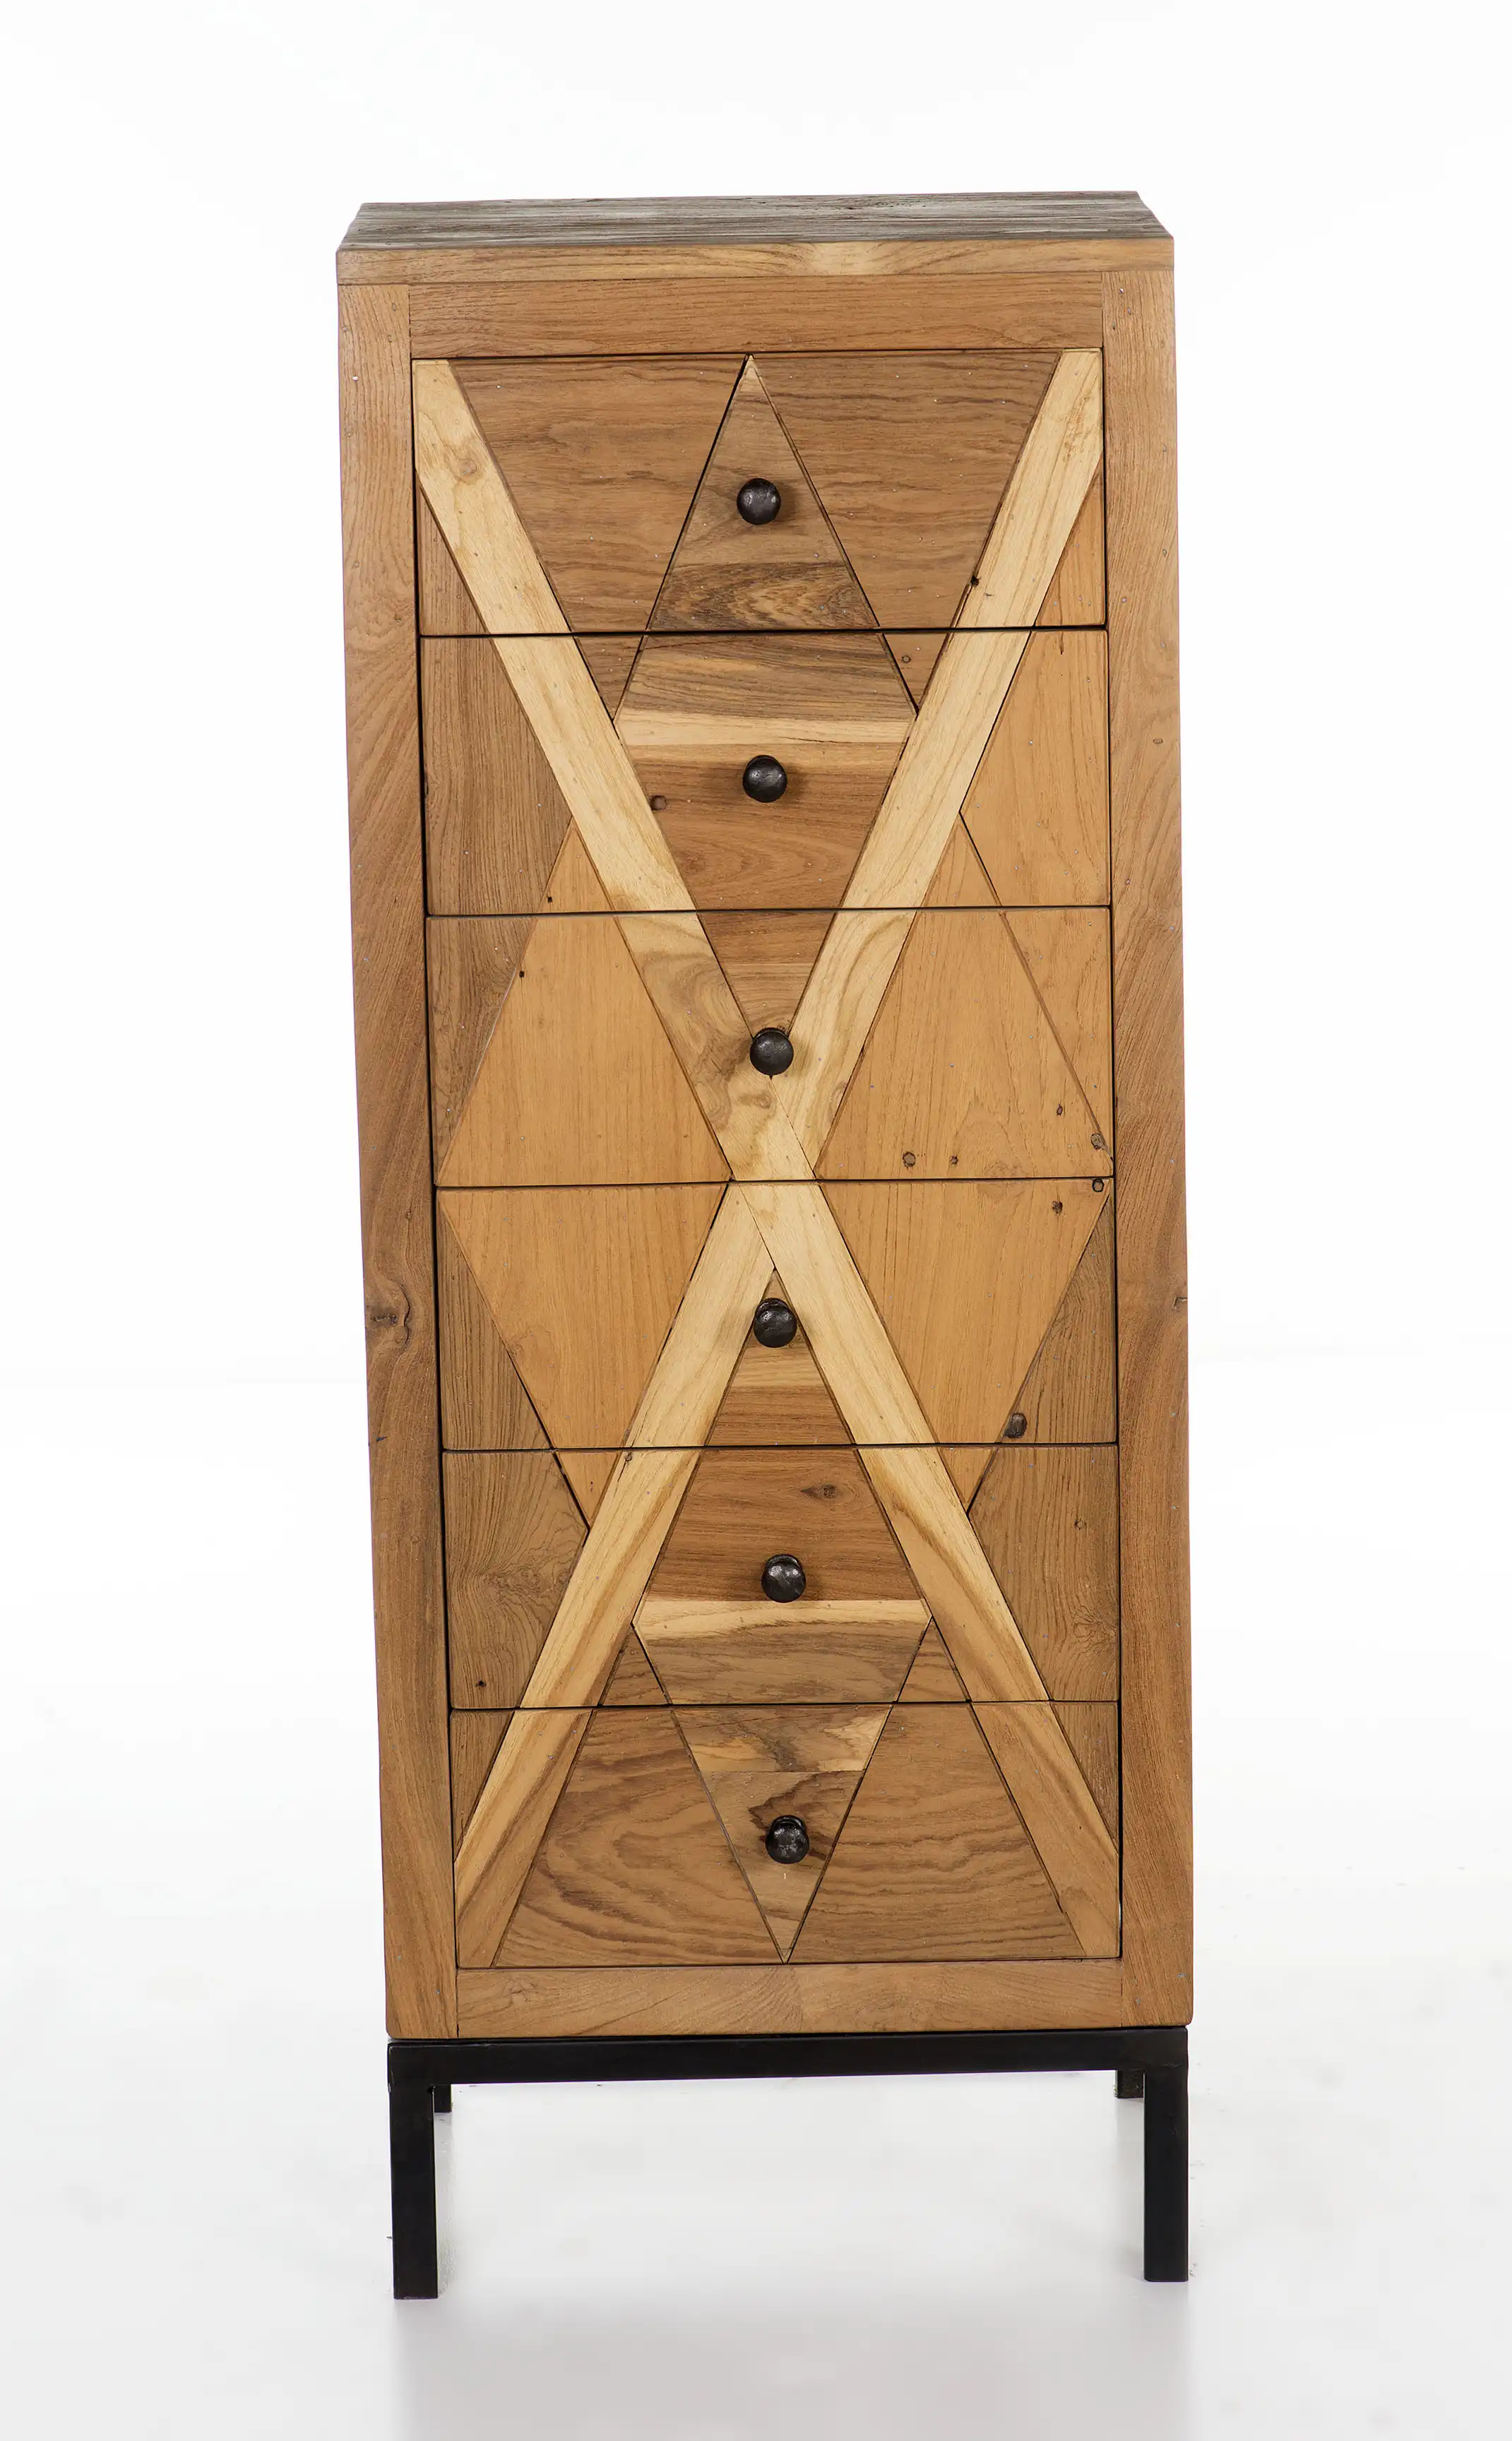 Parket Collection's Wooden Drawer Chest with 6 Drawers - popular handicrafts